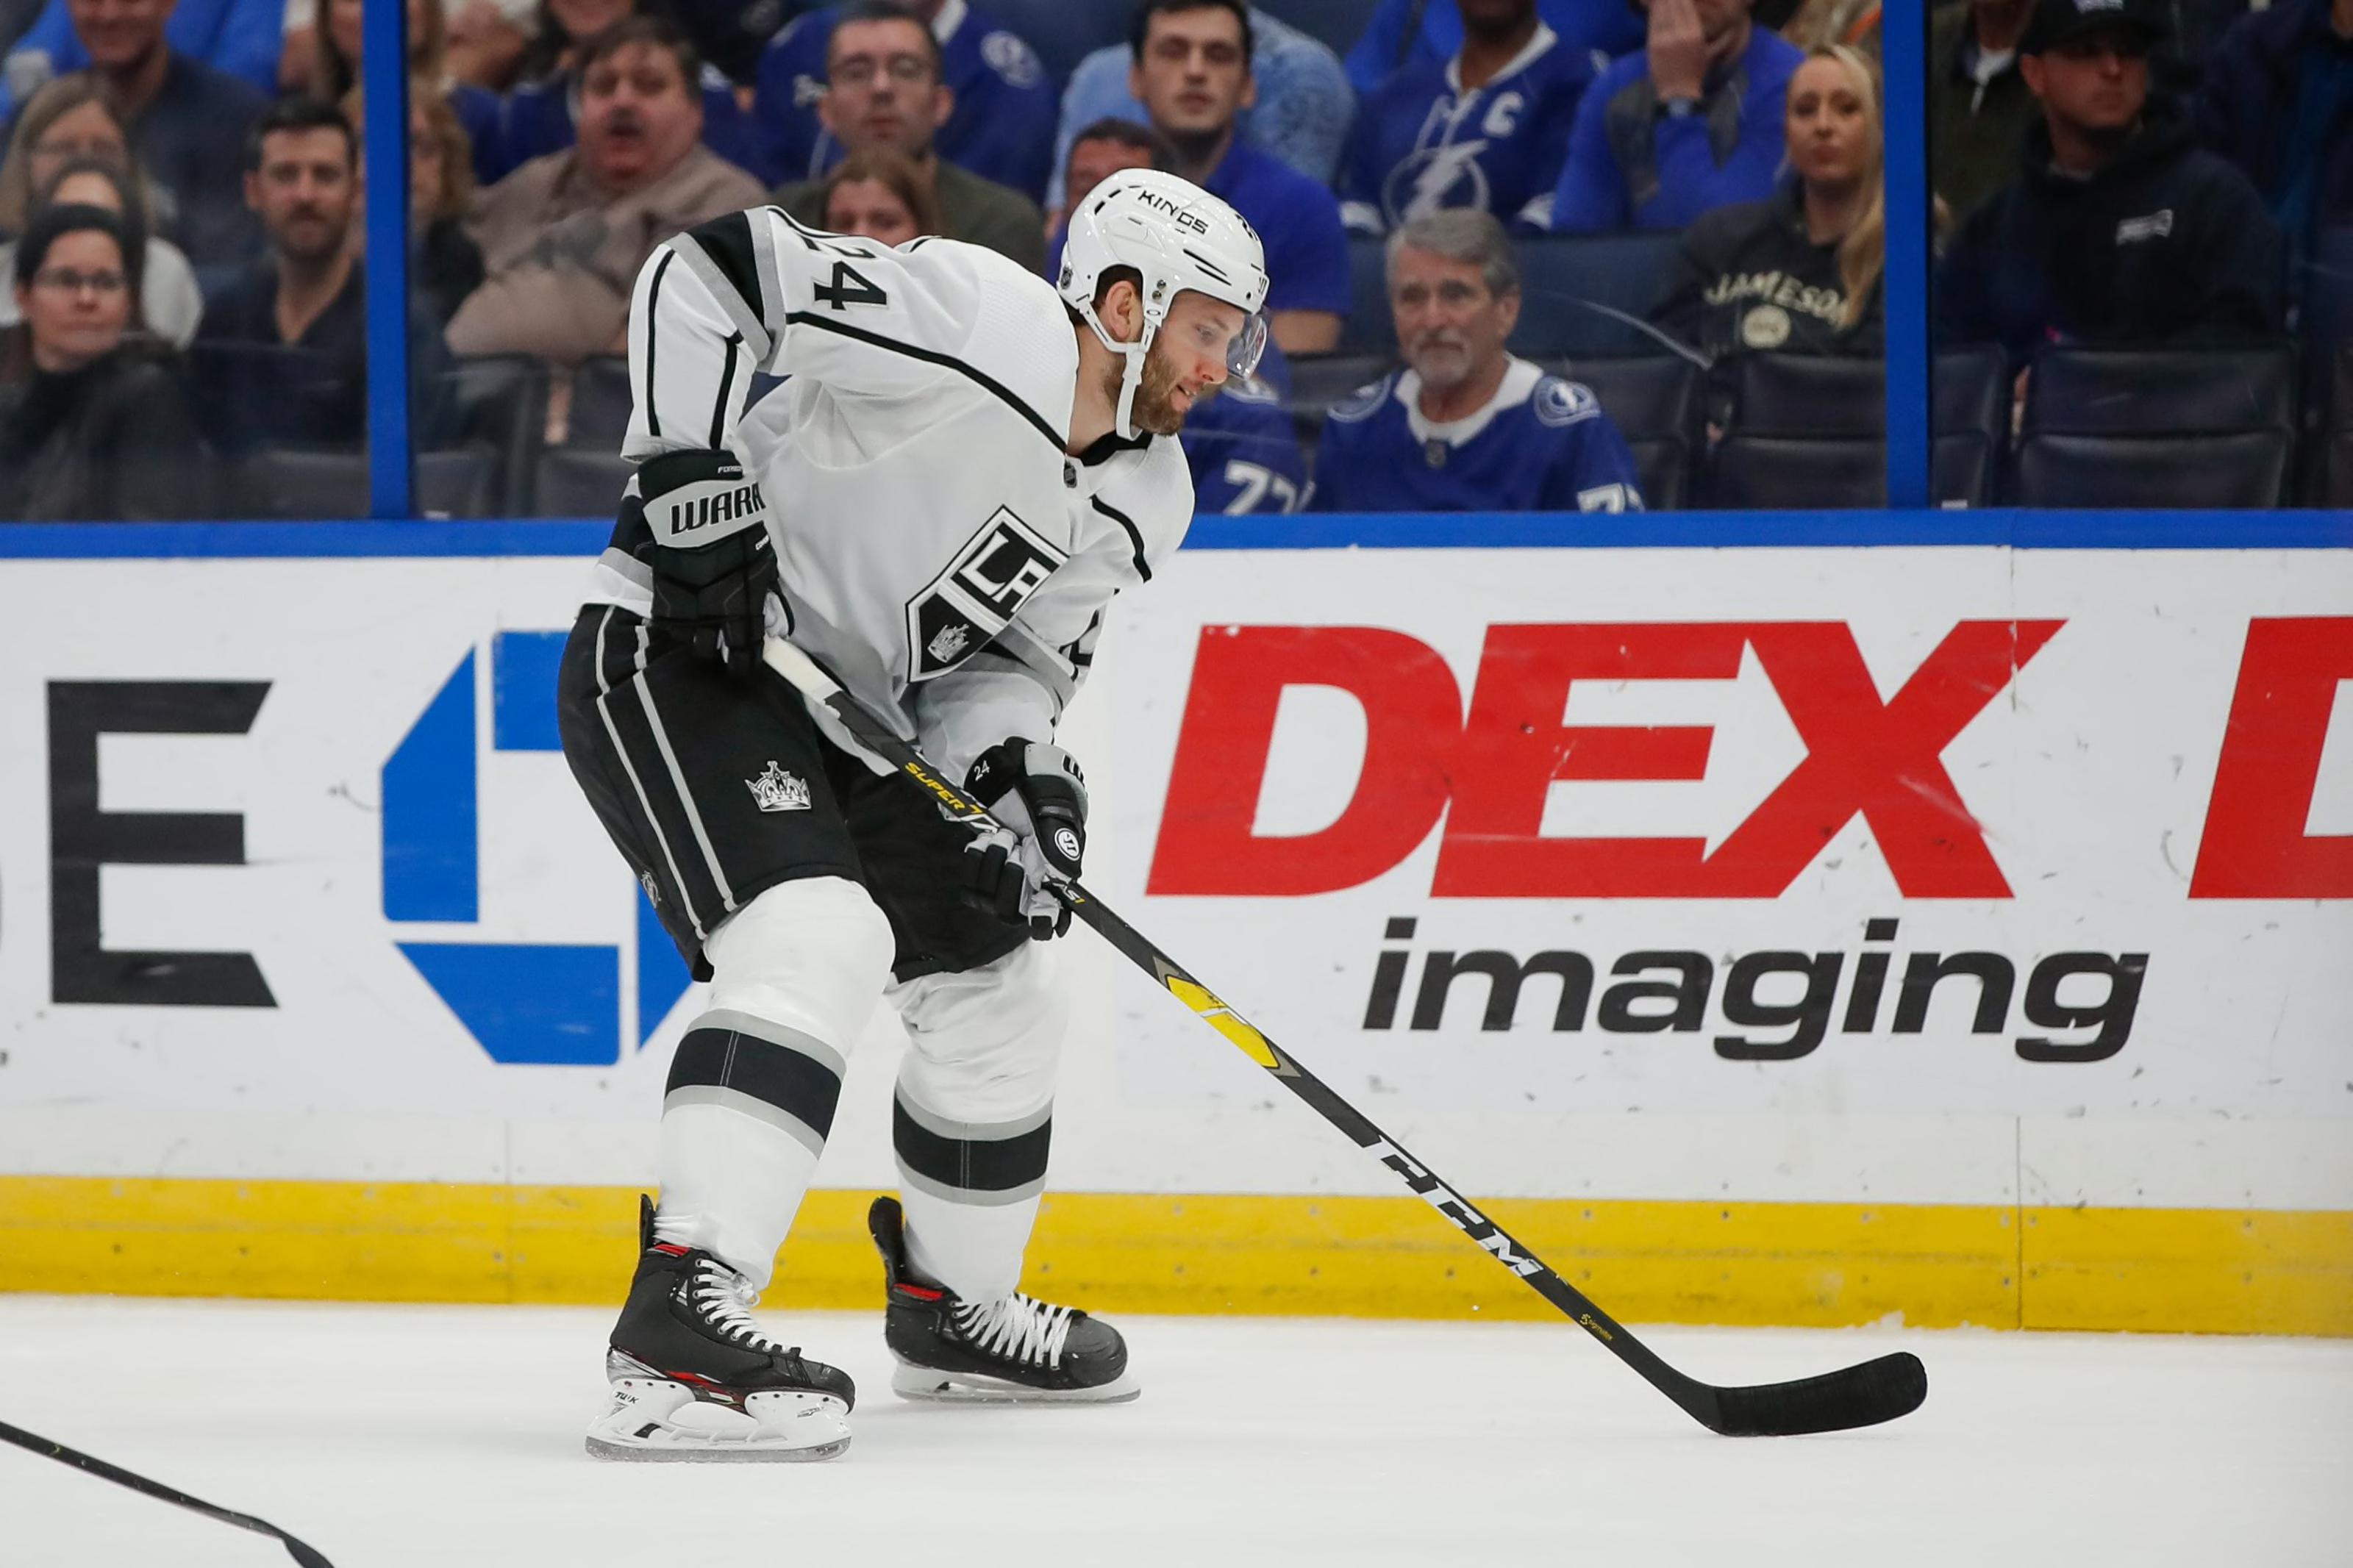 NHL trade rumors 2020: Los Angeles Kings should go all in, trade